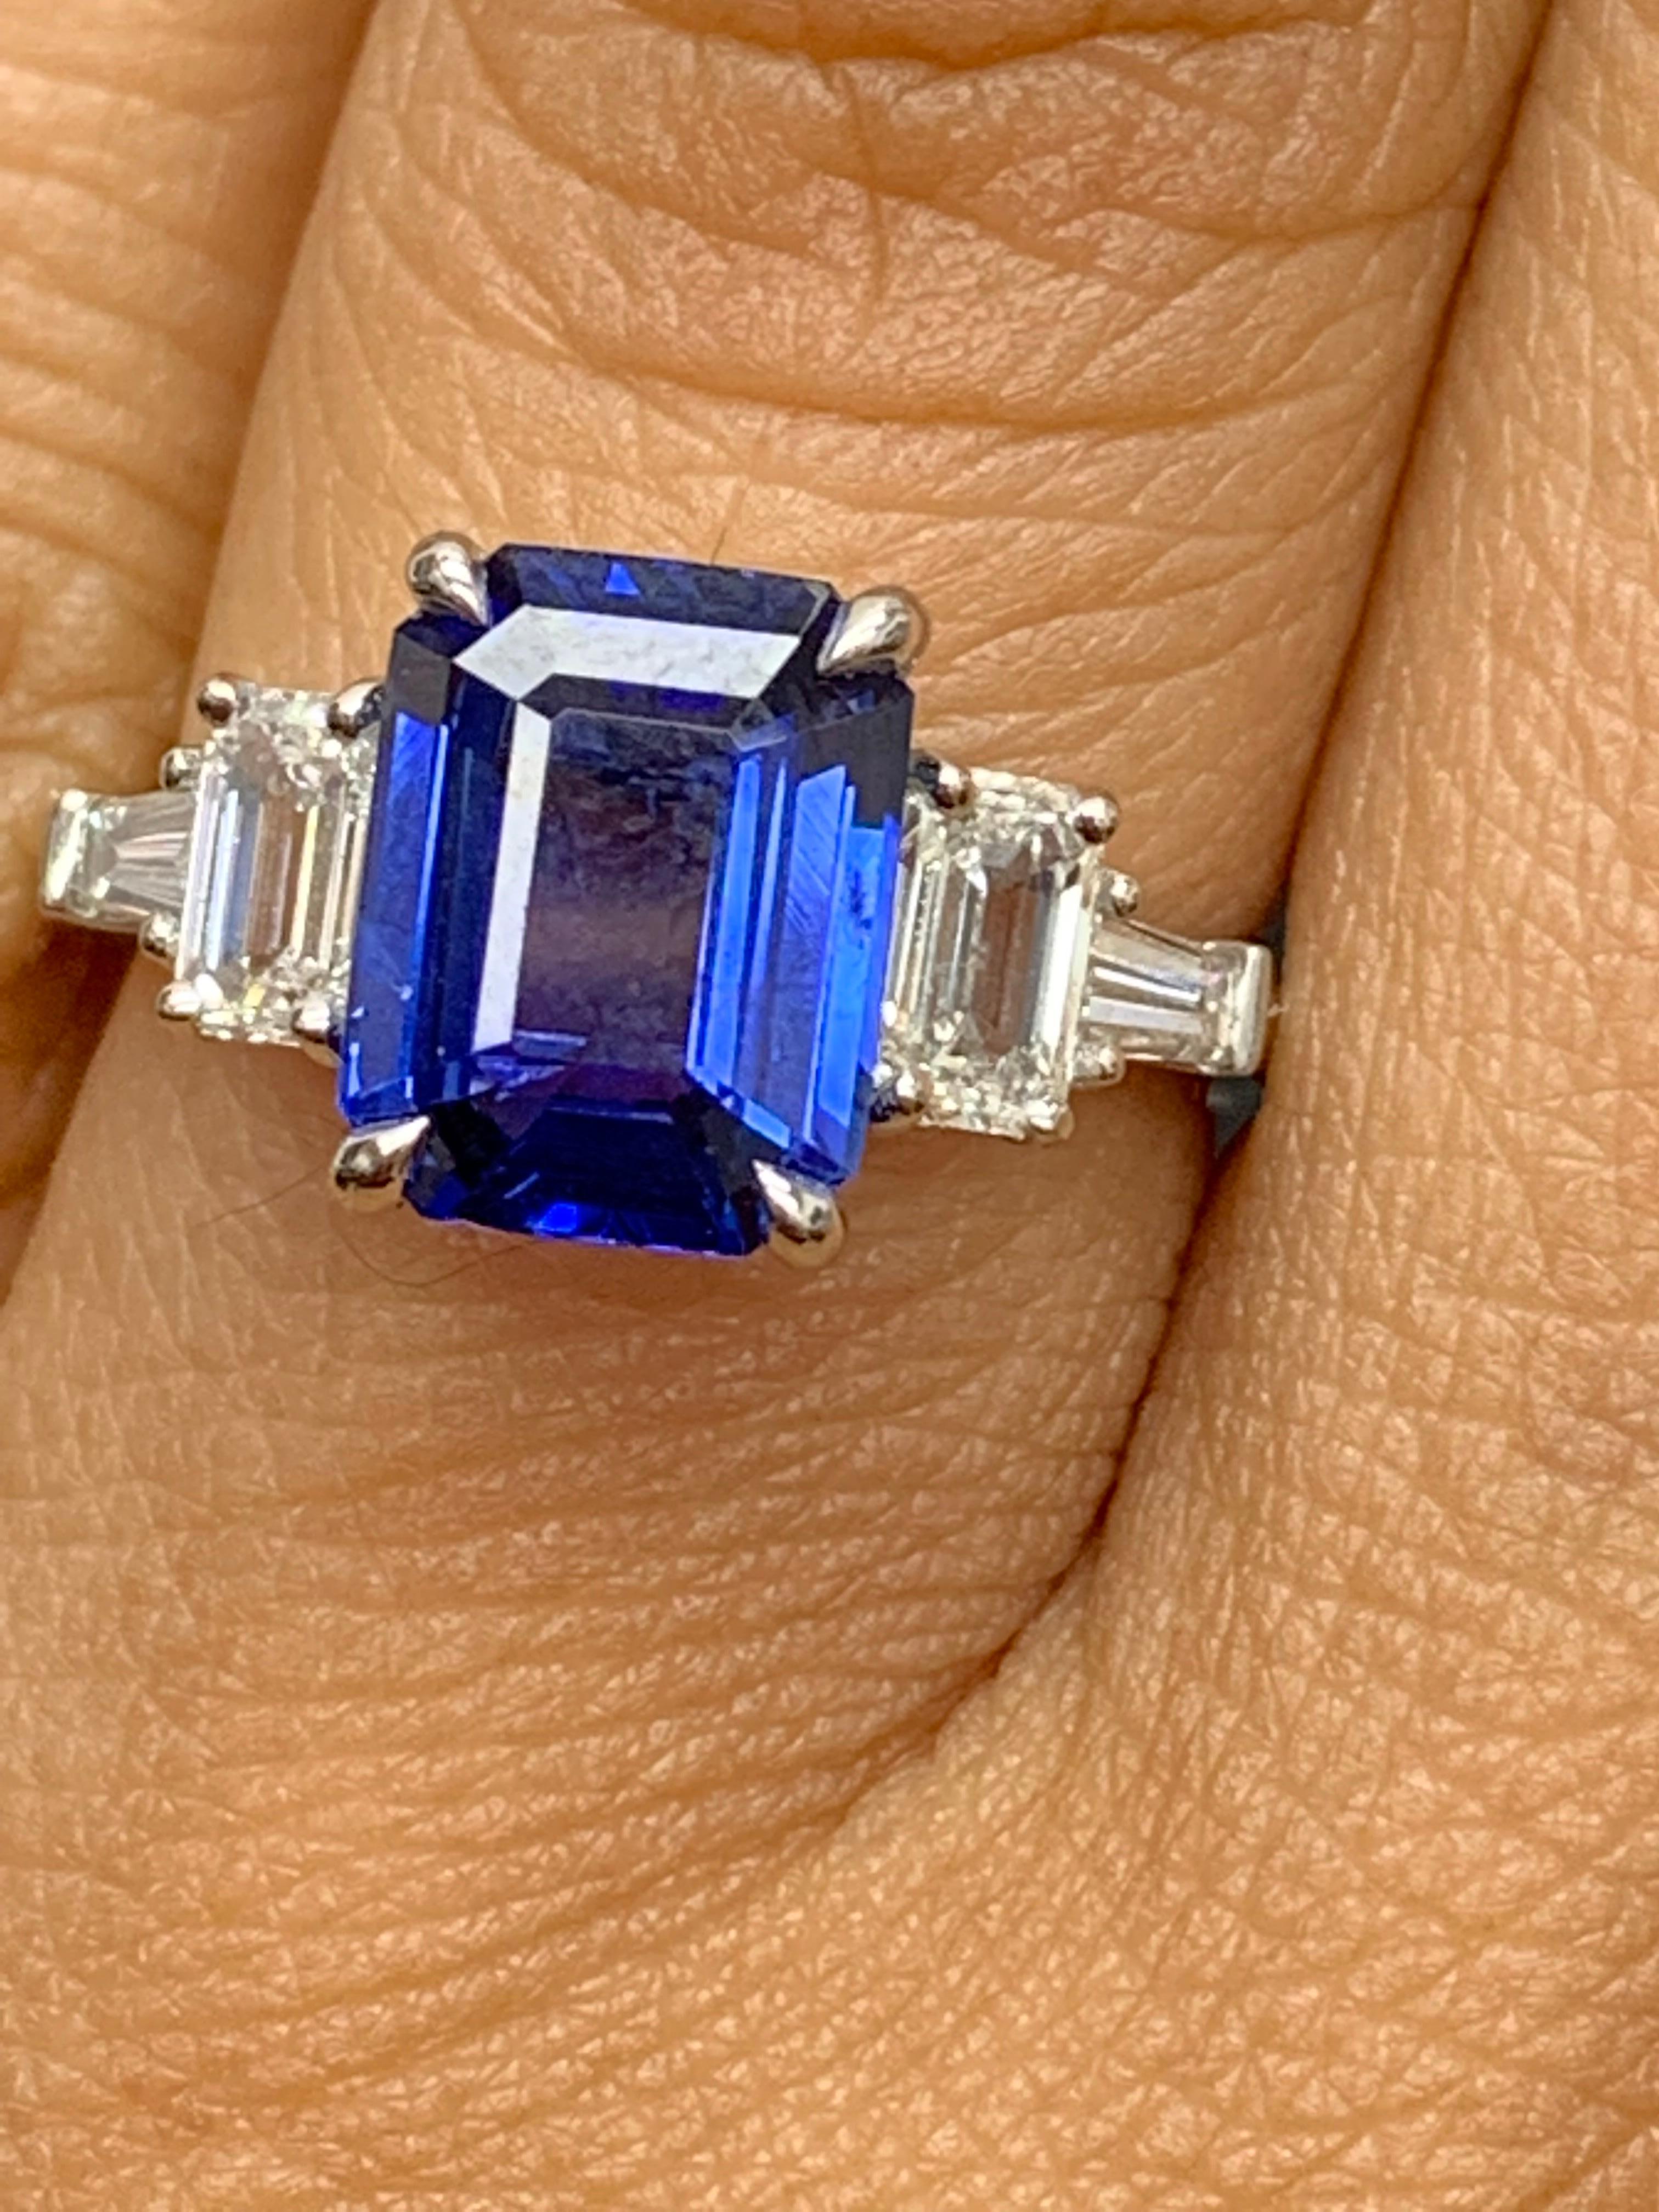 A stunning ring showcasing a rich intense emerald cut blue sapphire weighing 2.91 carats.  Flanking the center stone are two emerald-cut diamonds weighing 0.68 carats and two baguette diamonds on each side weighing 0.25 carats in total, Made in